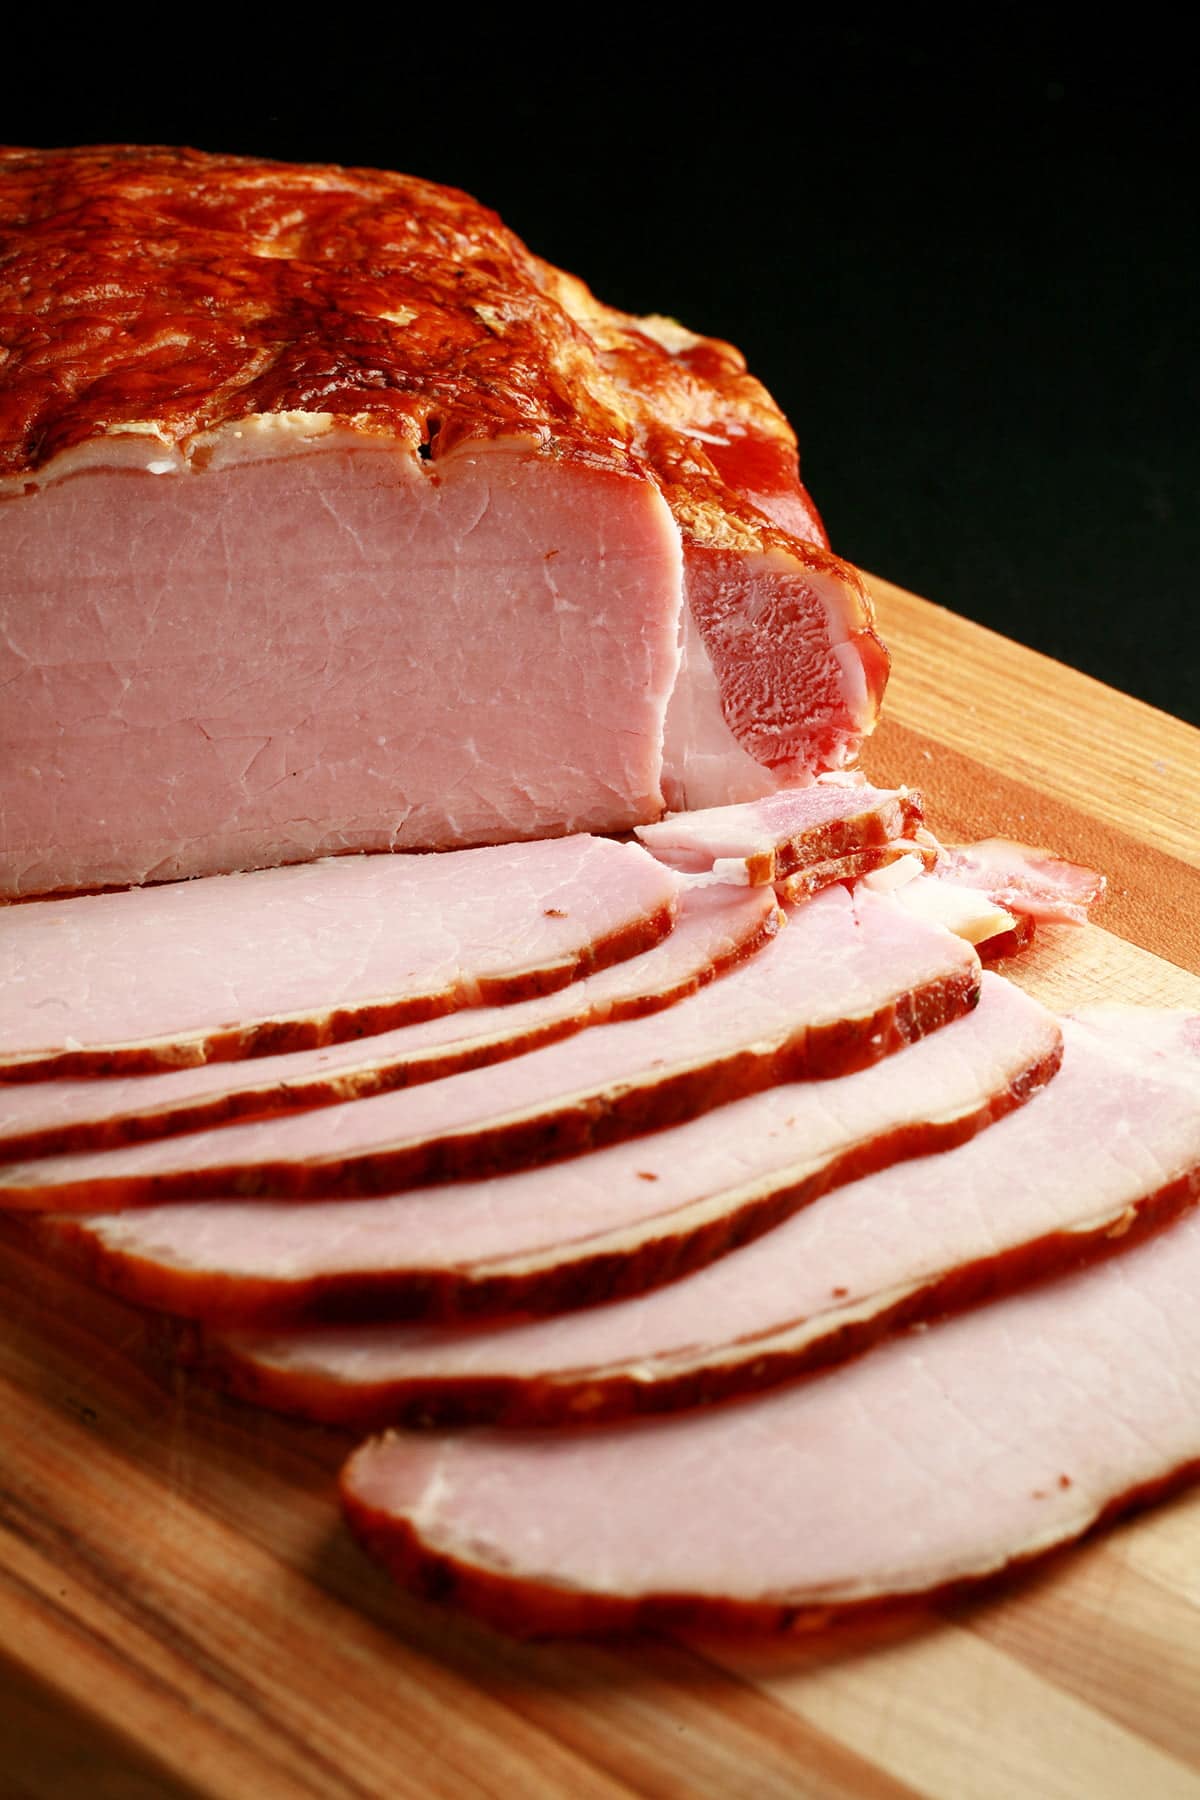 A cured and smoked pork loin, sliced - proper back bacon!